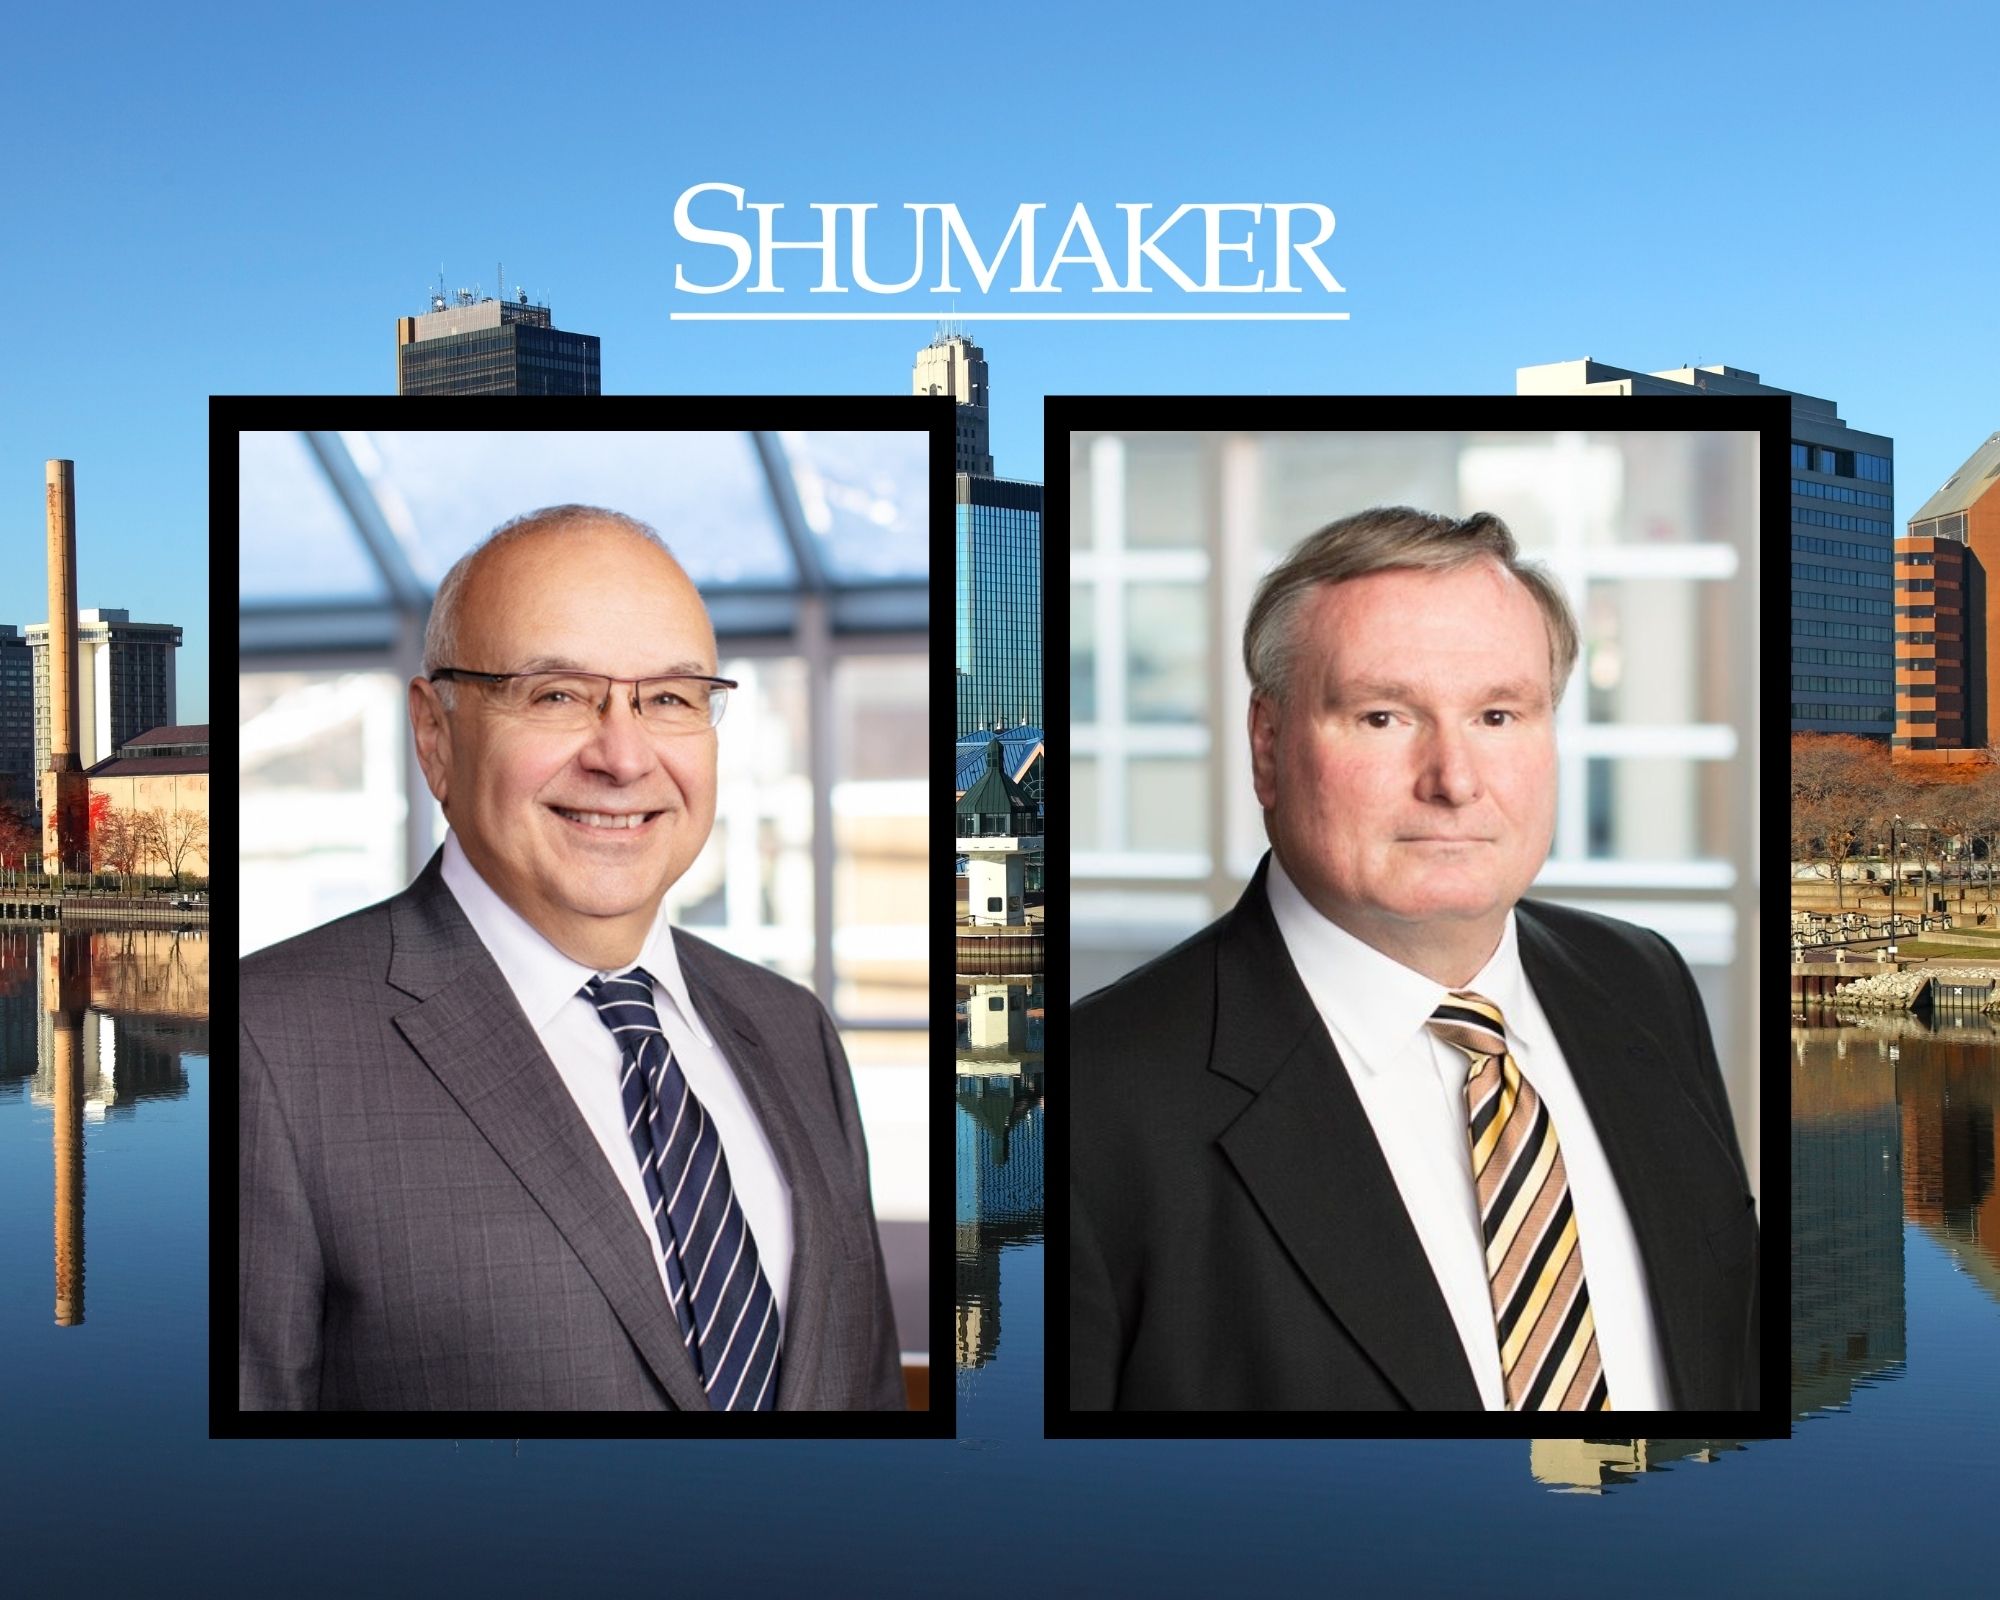 Shumaker Lawyers Score Win in a Case of First Impression Regarding Citizen Suit Under the Safe Drinking Water Act, and the Scope of the SDWA’s “Diligent Prosecution” Bar